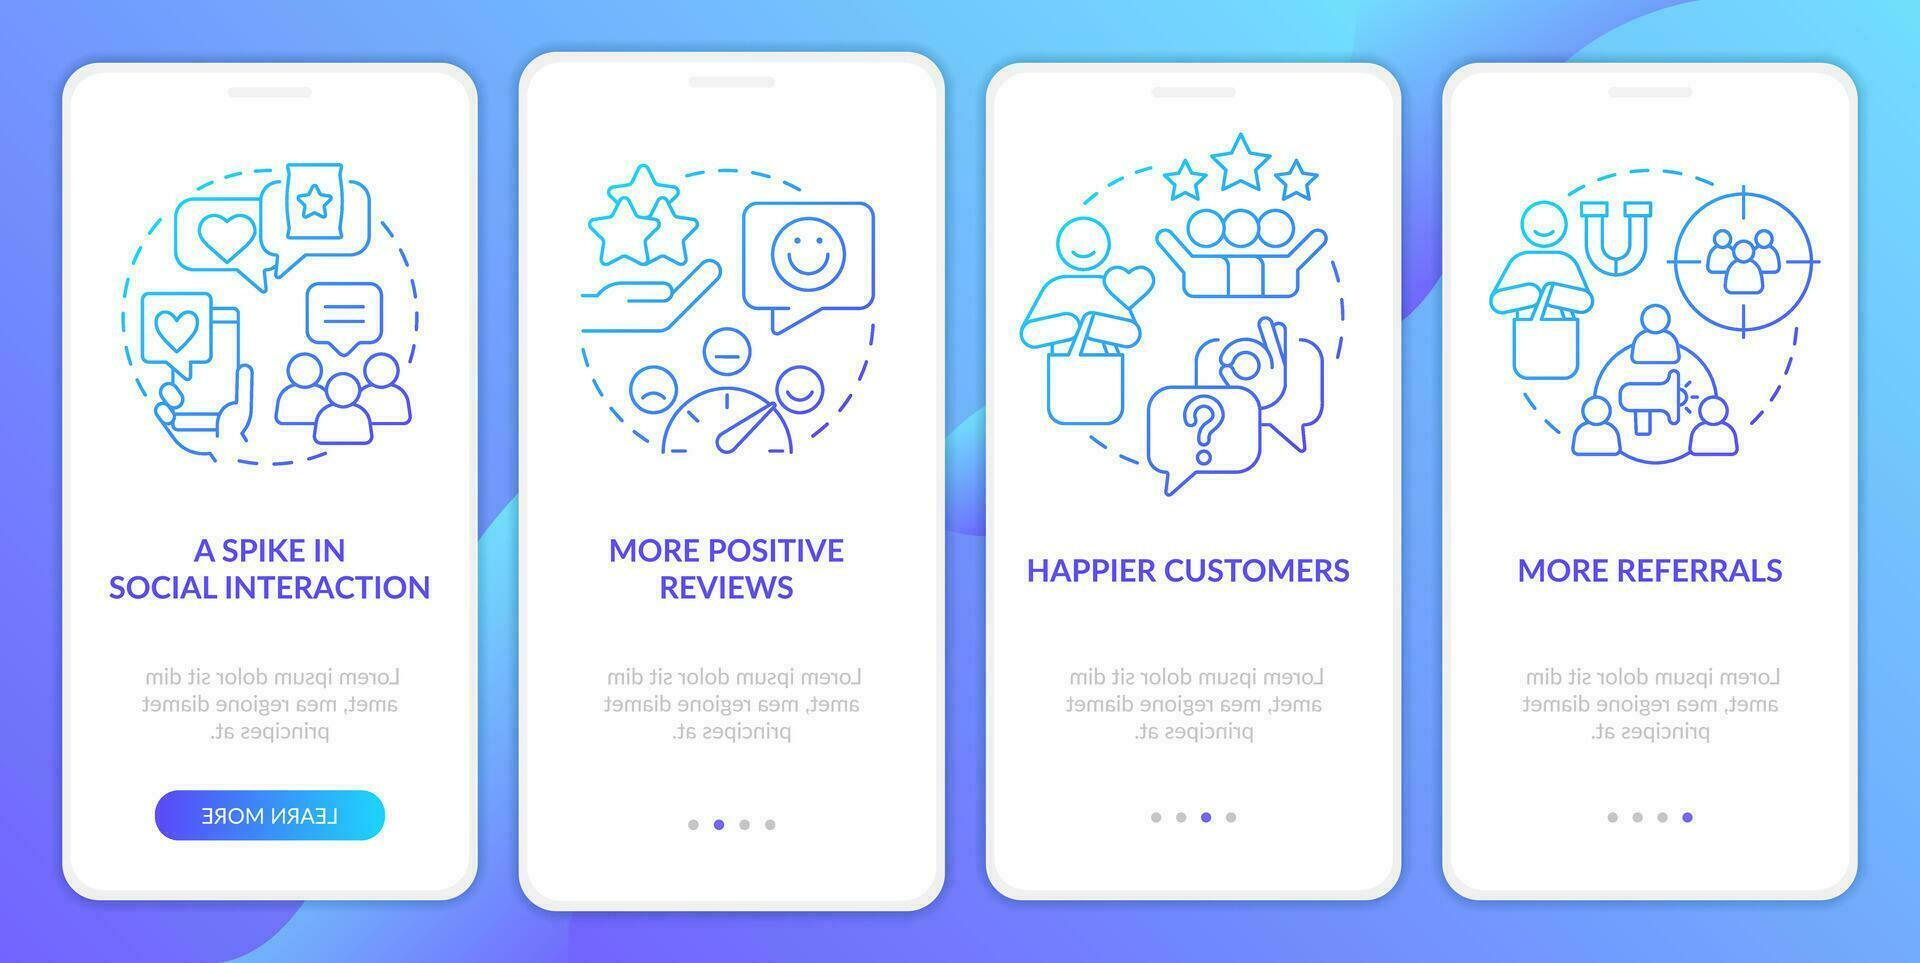 Tracking customer engagement blue gradient onboarding mobile app screen. Walkthrough 4 steps graphic instructions with linear concepts. UI, UX, GUI templated vector